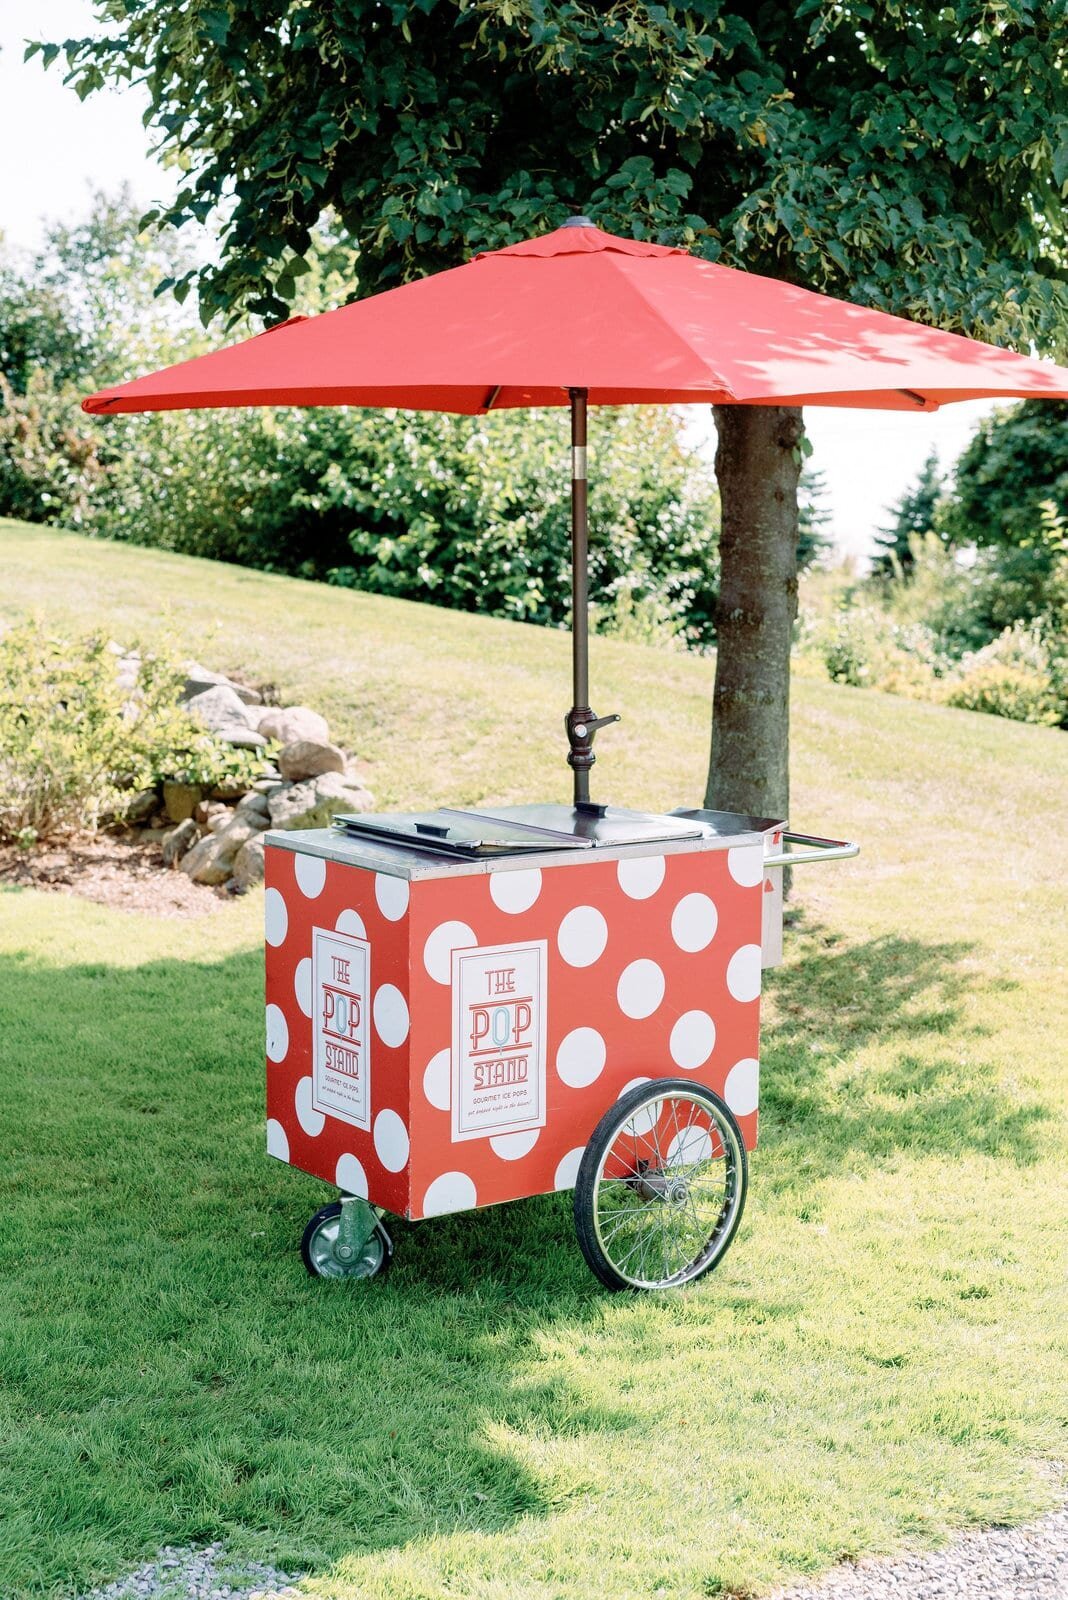 Custom Popsicle stand  at wedding day Pipers Heath Wedding Milton Toronto Wedding Venue Jacqueline James Photography